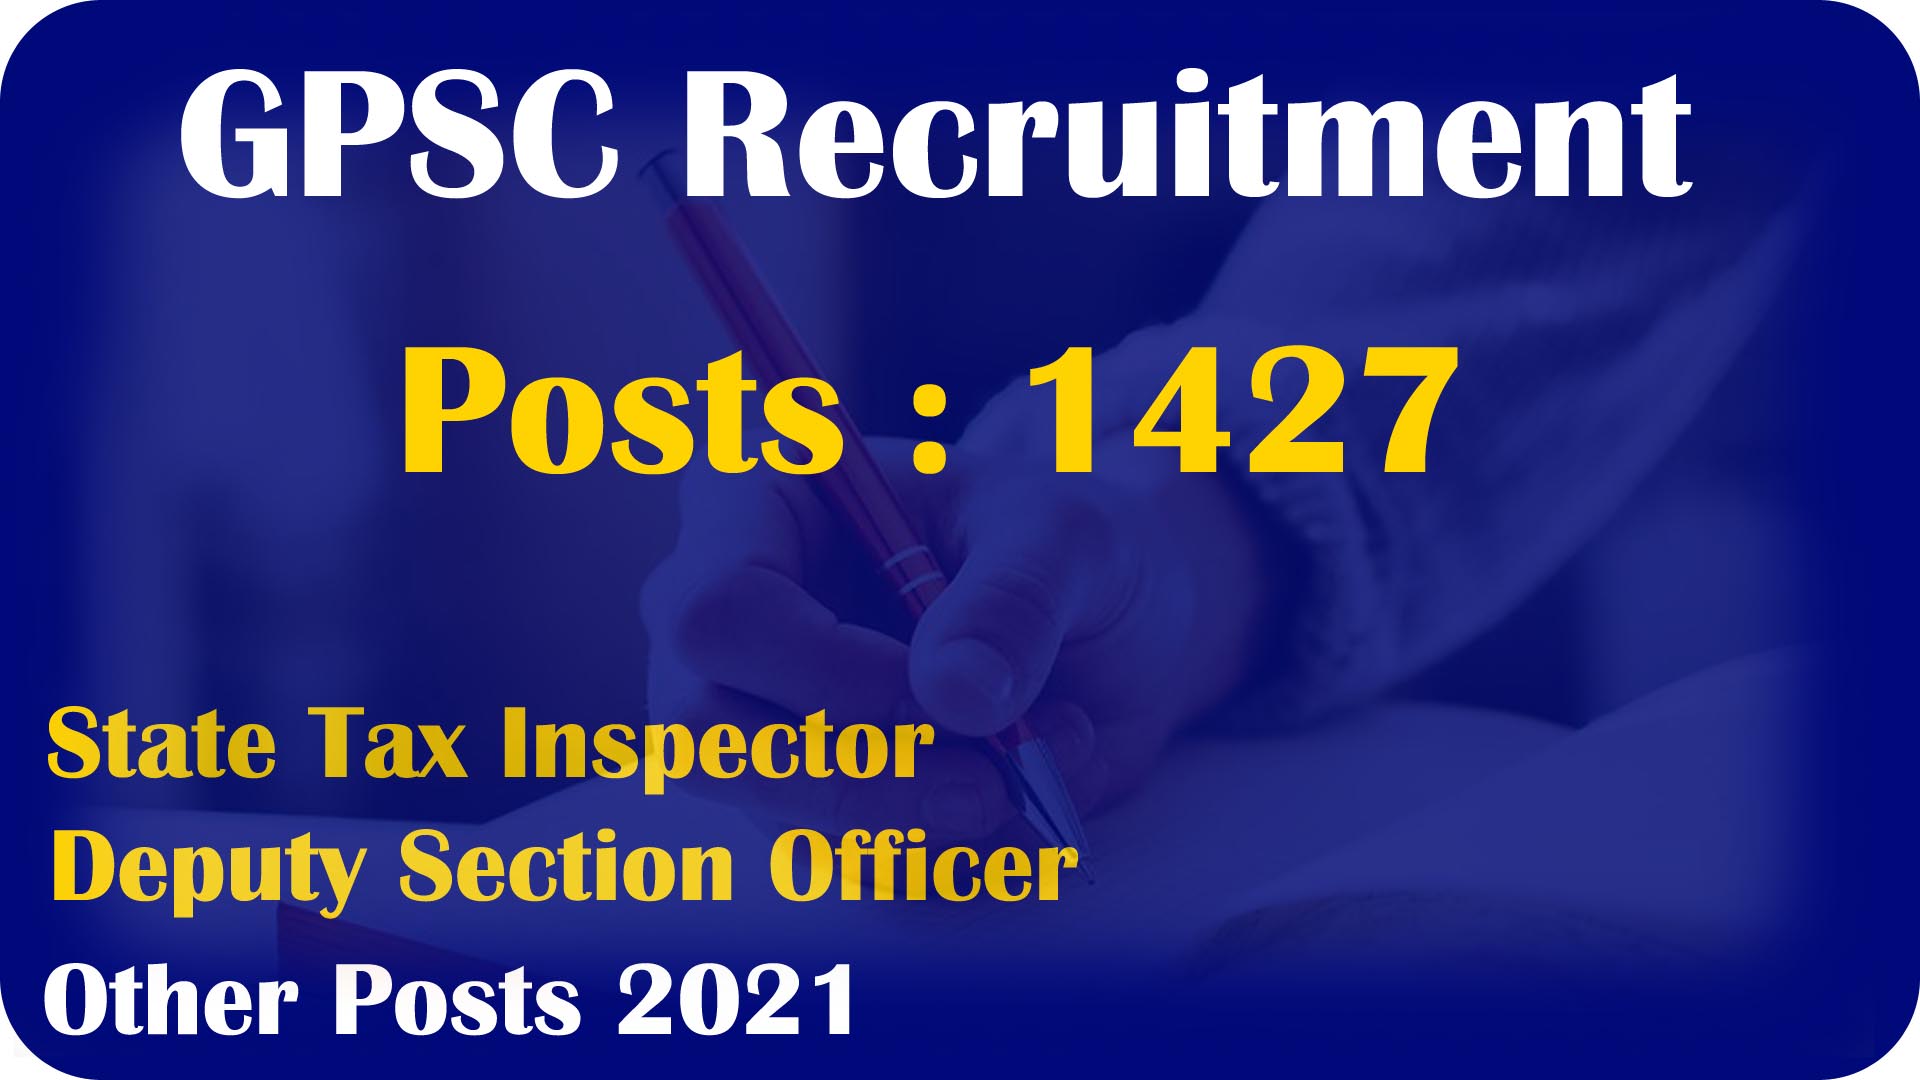 GPSC Recruitment for State Tax Inspector